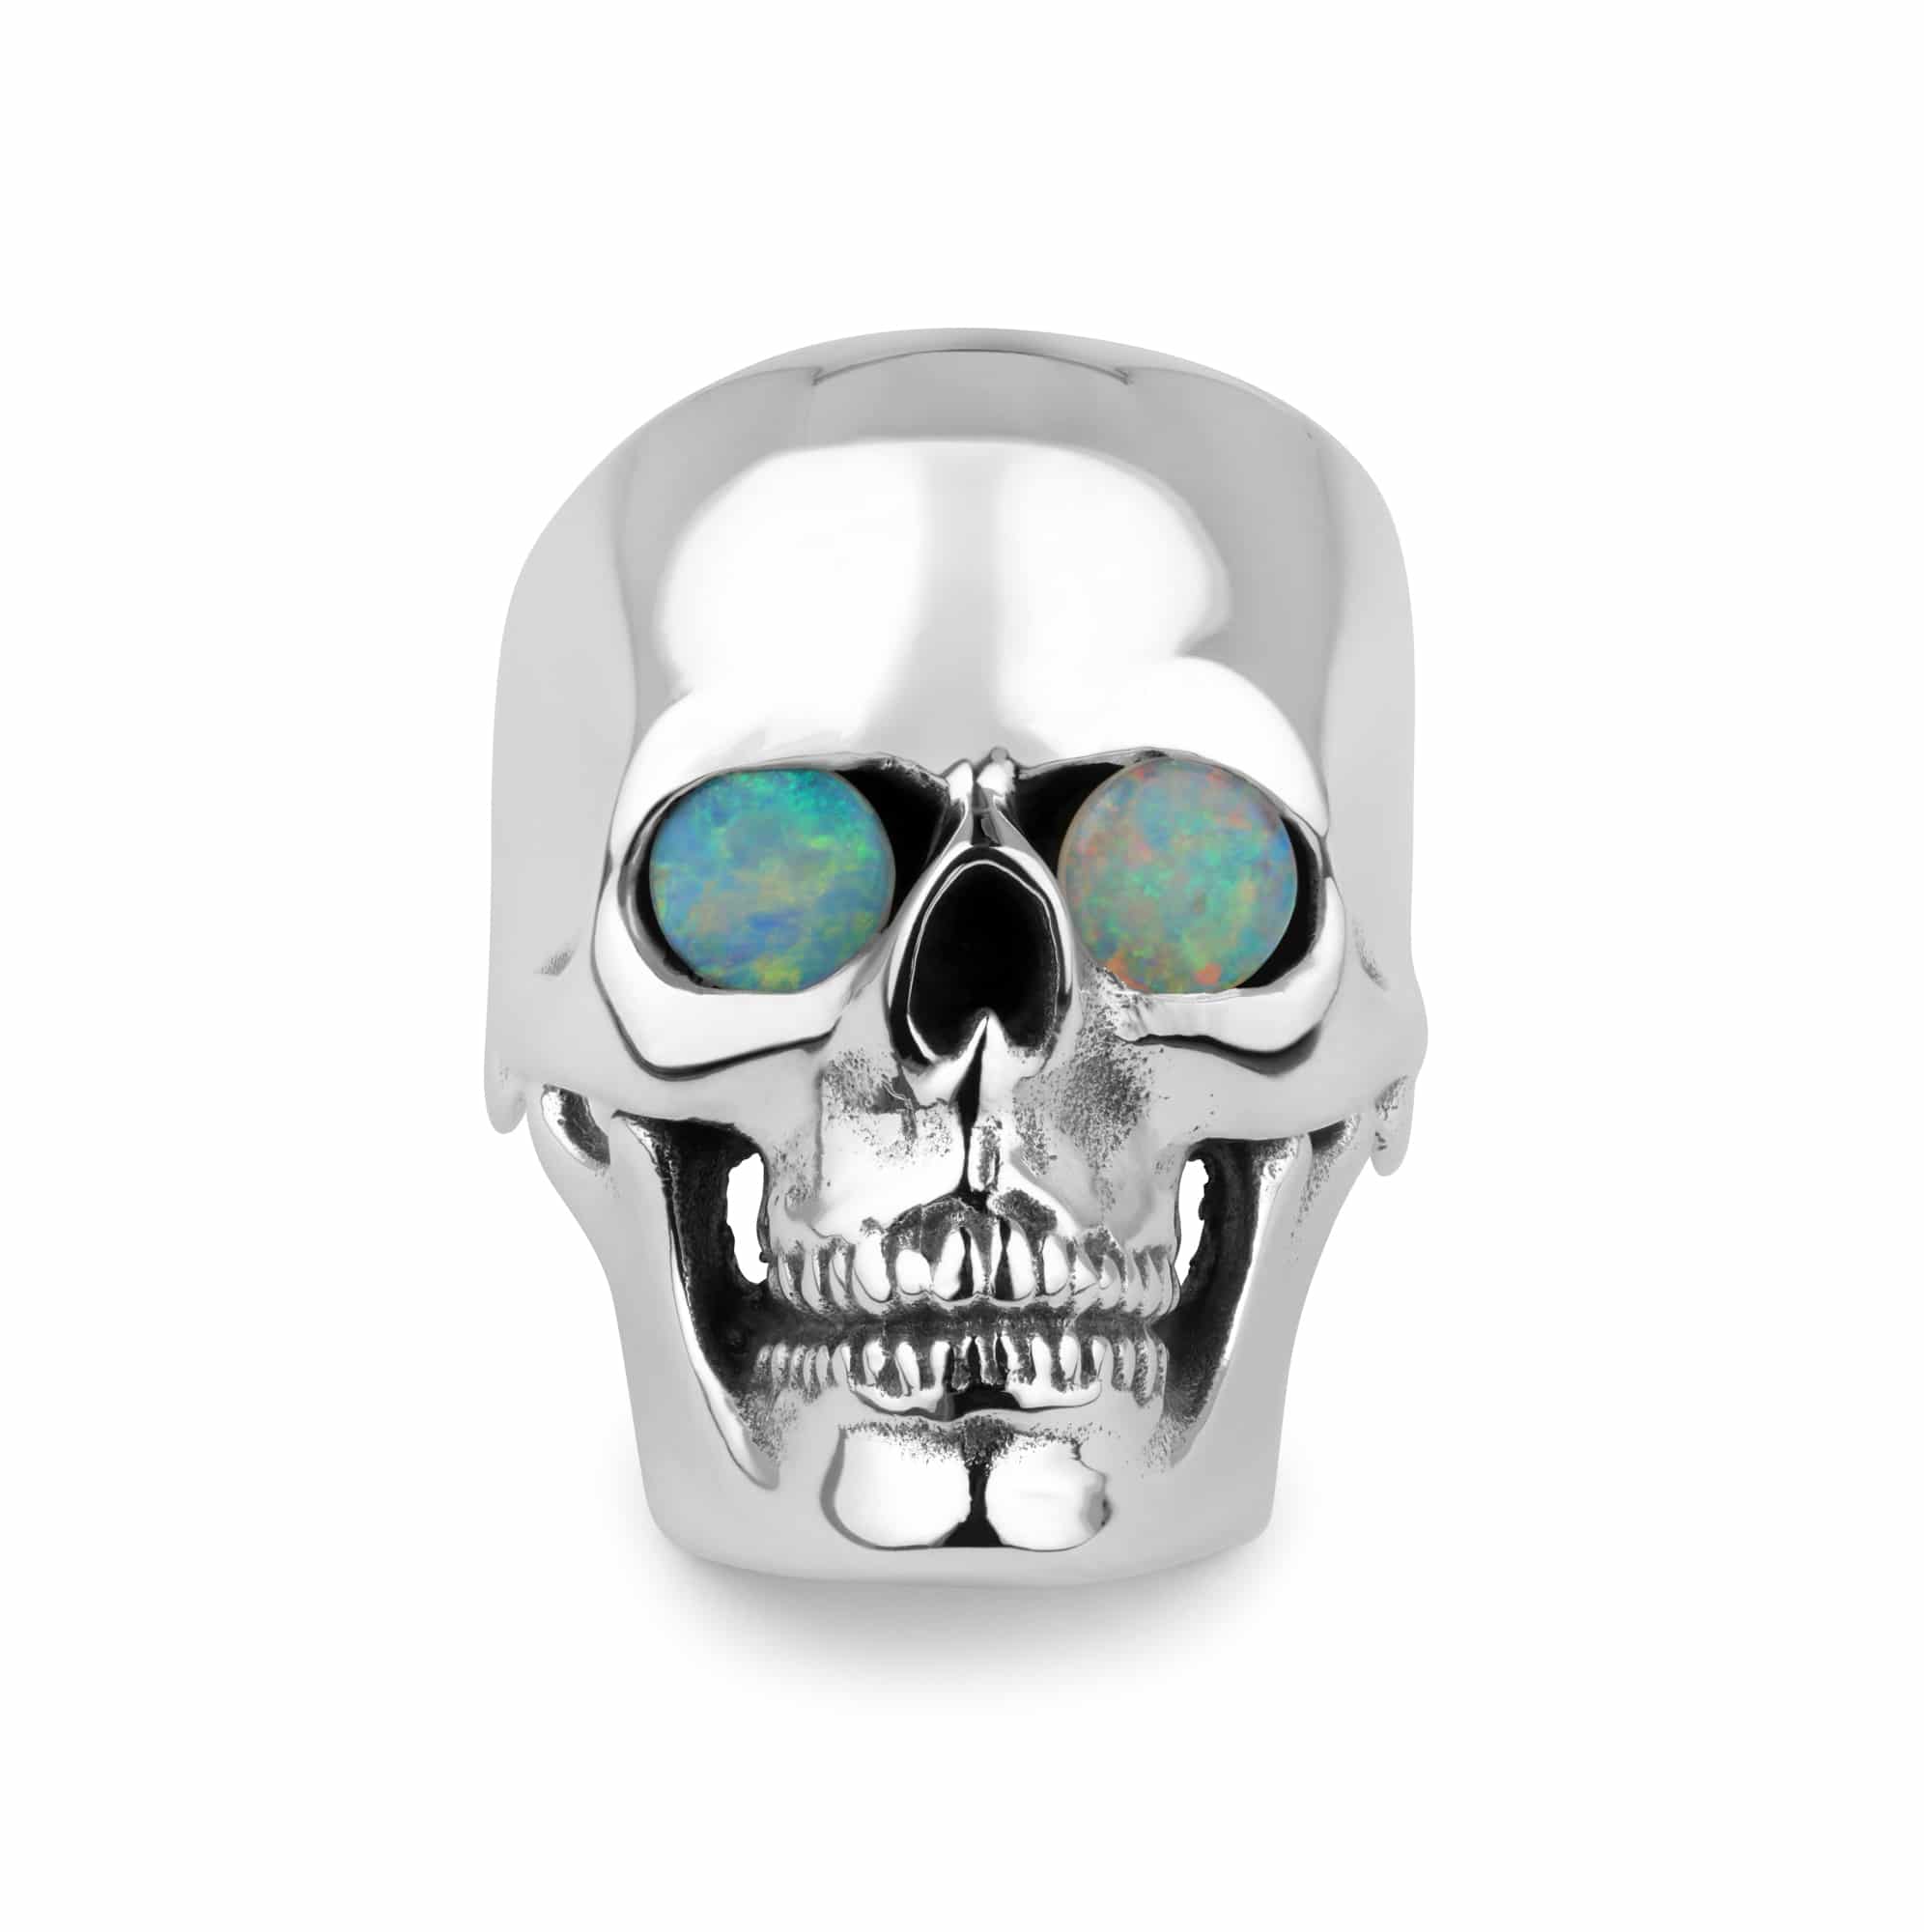 Small-Anatomical-Skull-with-Opal-Eyes.jpg